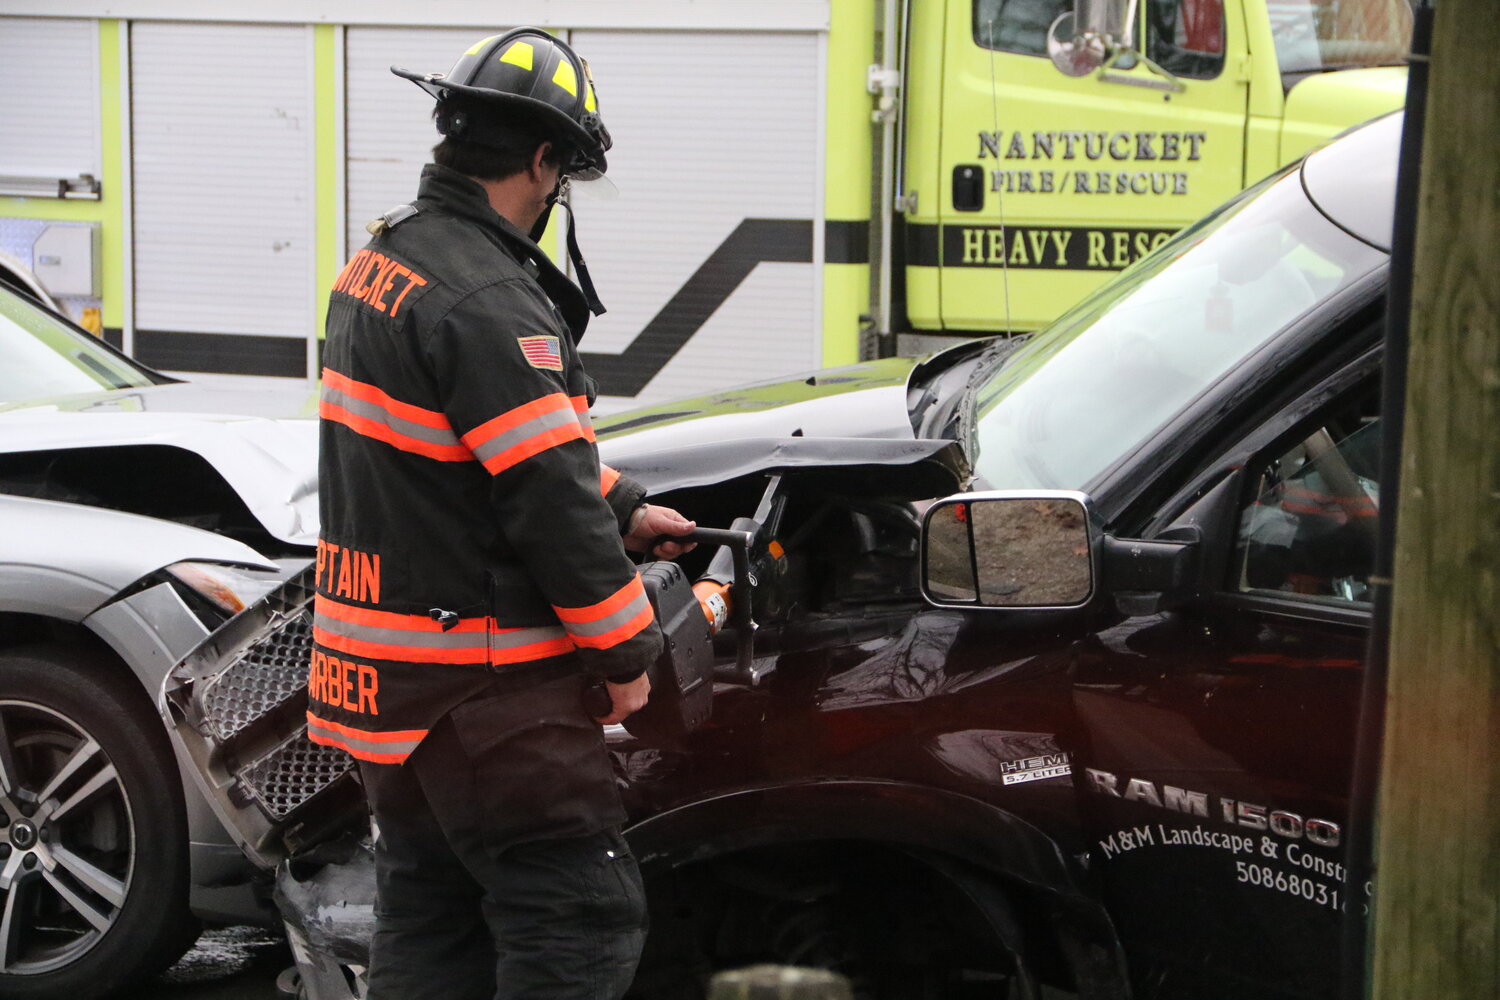 One person was transported to Nantucket Cottage Hospital Wednesday following a head-on collision at the Milestone Rotary.